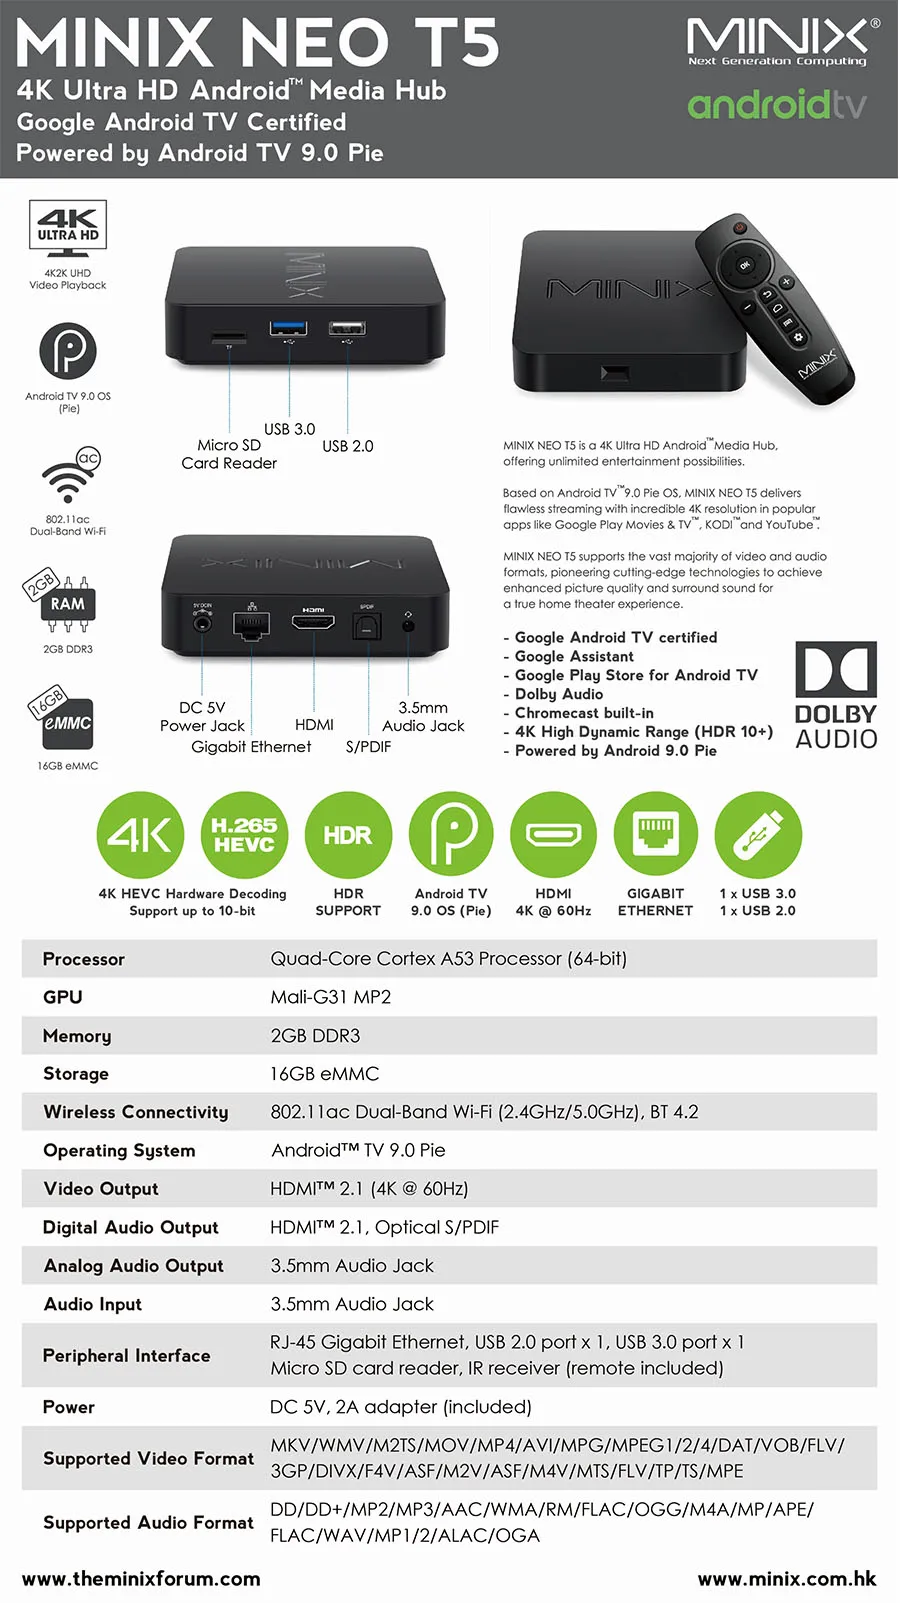 900px x 1603px - Minix Neo T5 Tv Box Amlogic S905x2 2g 16g 4k Ultra Hd Google Certified  Android Tv 9.0 Pie Smart Tv Box - Buy Minix Neo T5,Amlogic S905x2 Tv Box,Tv  Smart 4k Ultra